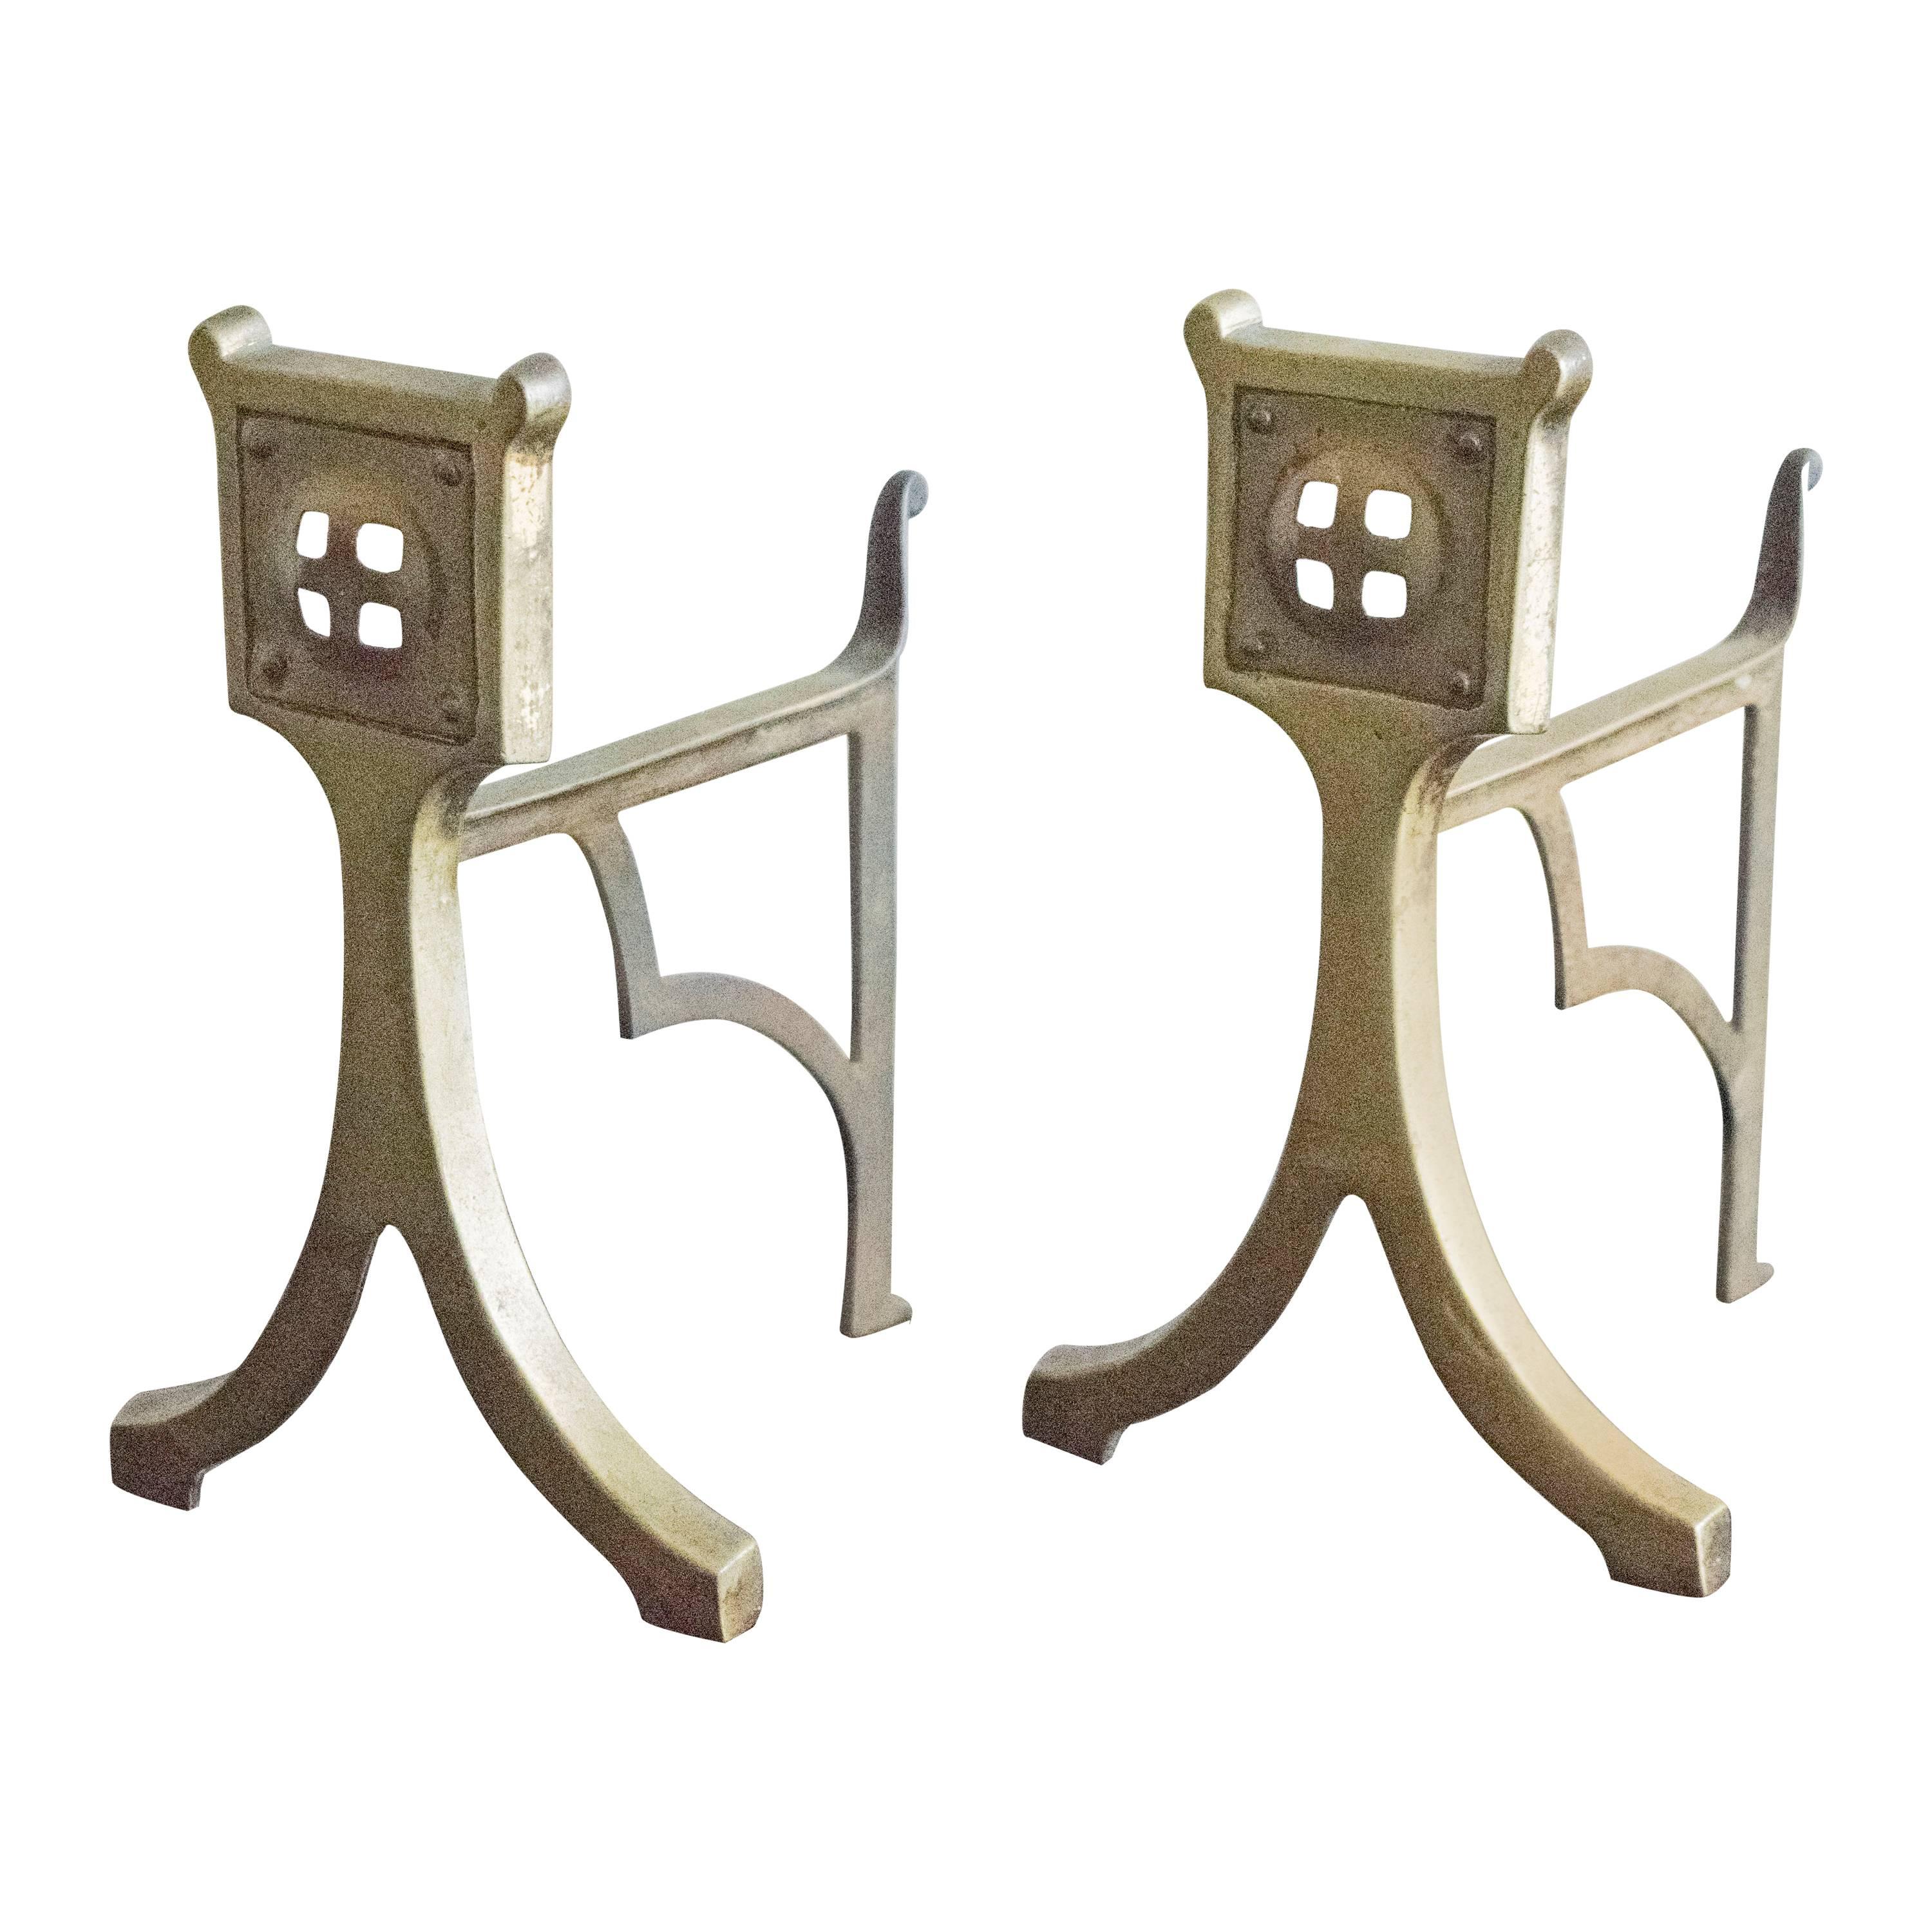 Art Nouveau or Secessionist Small Brass Andirons